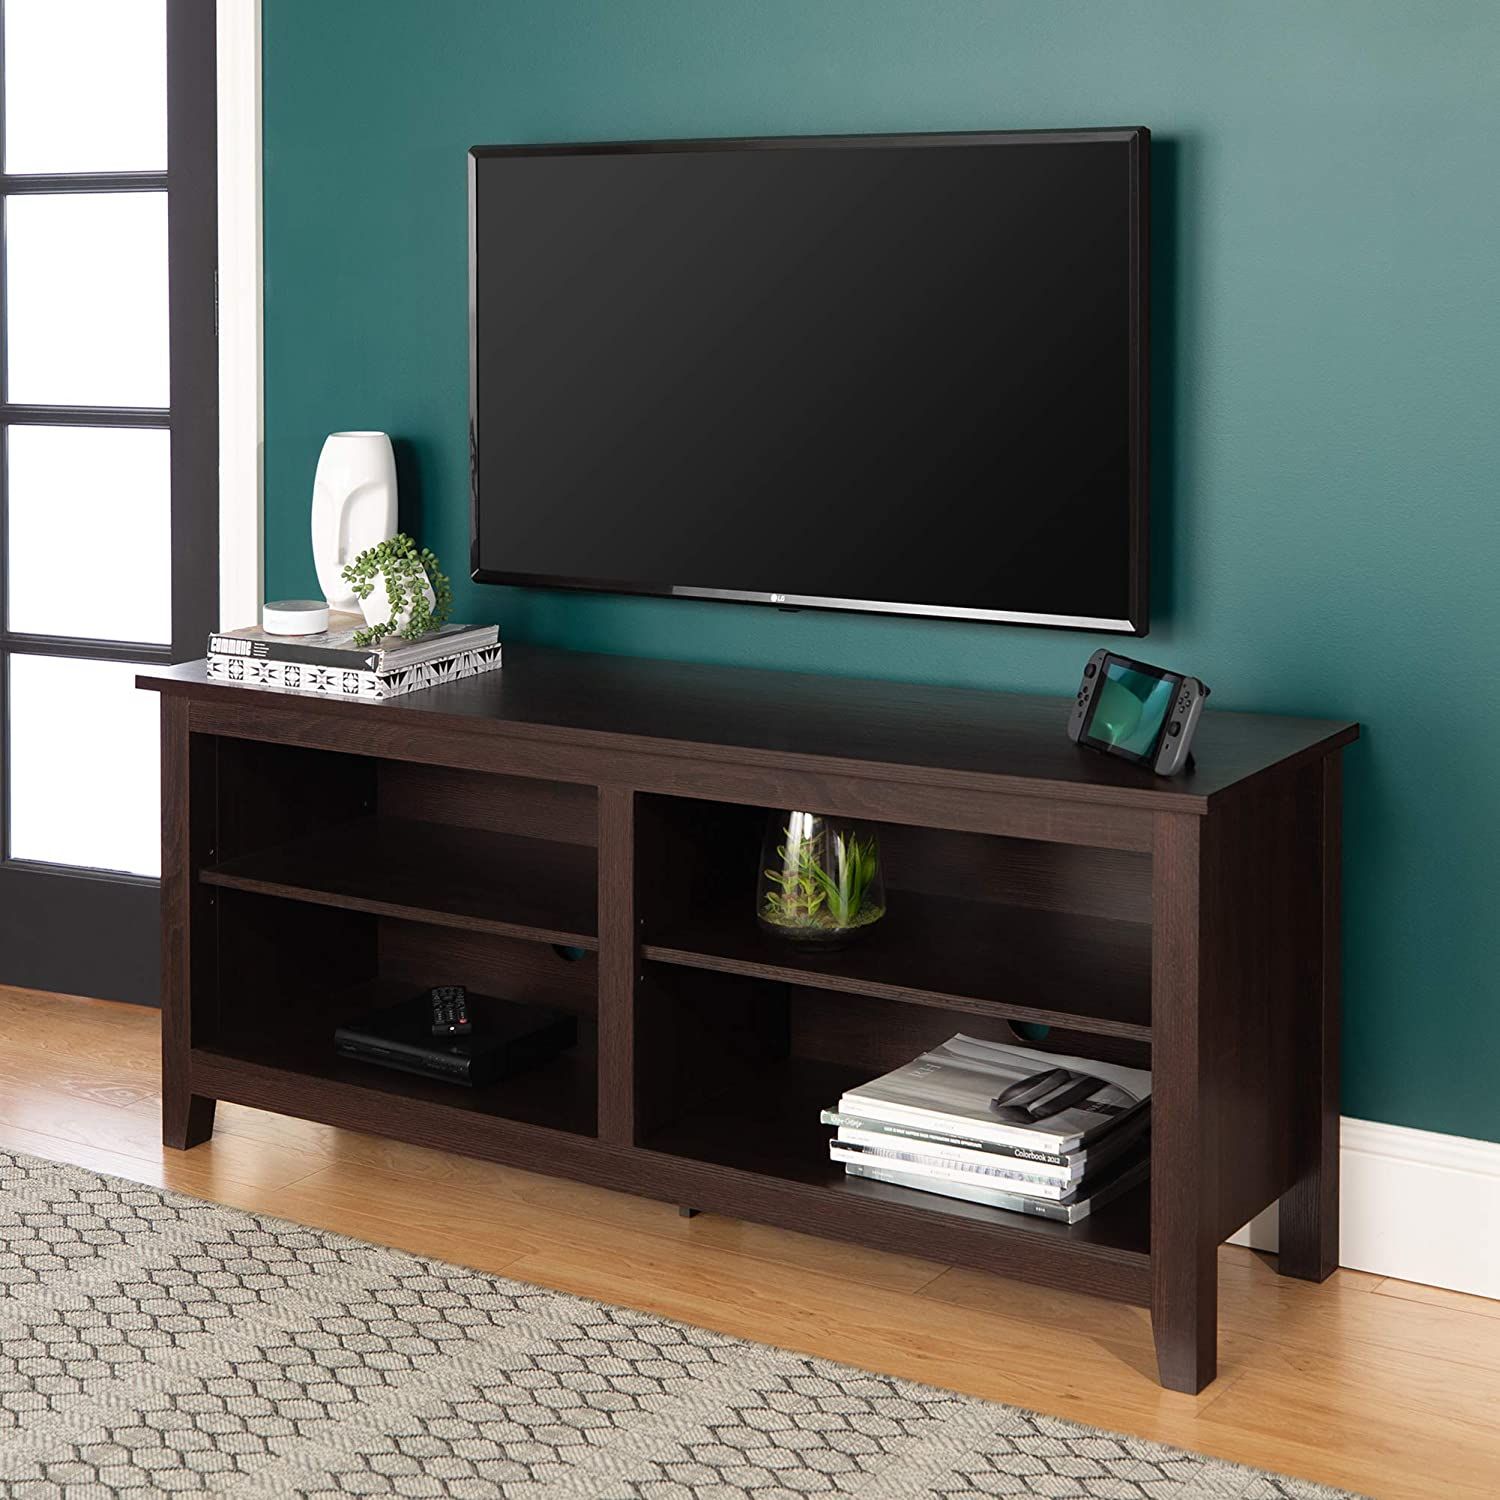 Sekey Home Entertainment Center Wood Media Tv Stand, 58 Inch Pertaining To Wood Tv Stands (View 2 of 15)